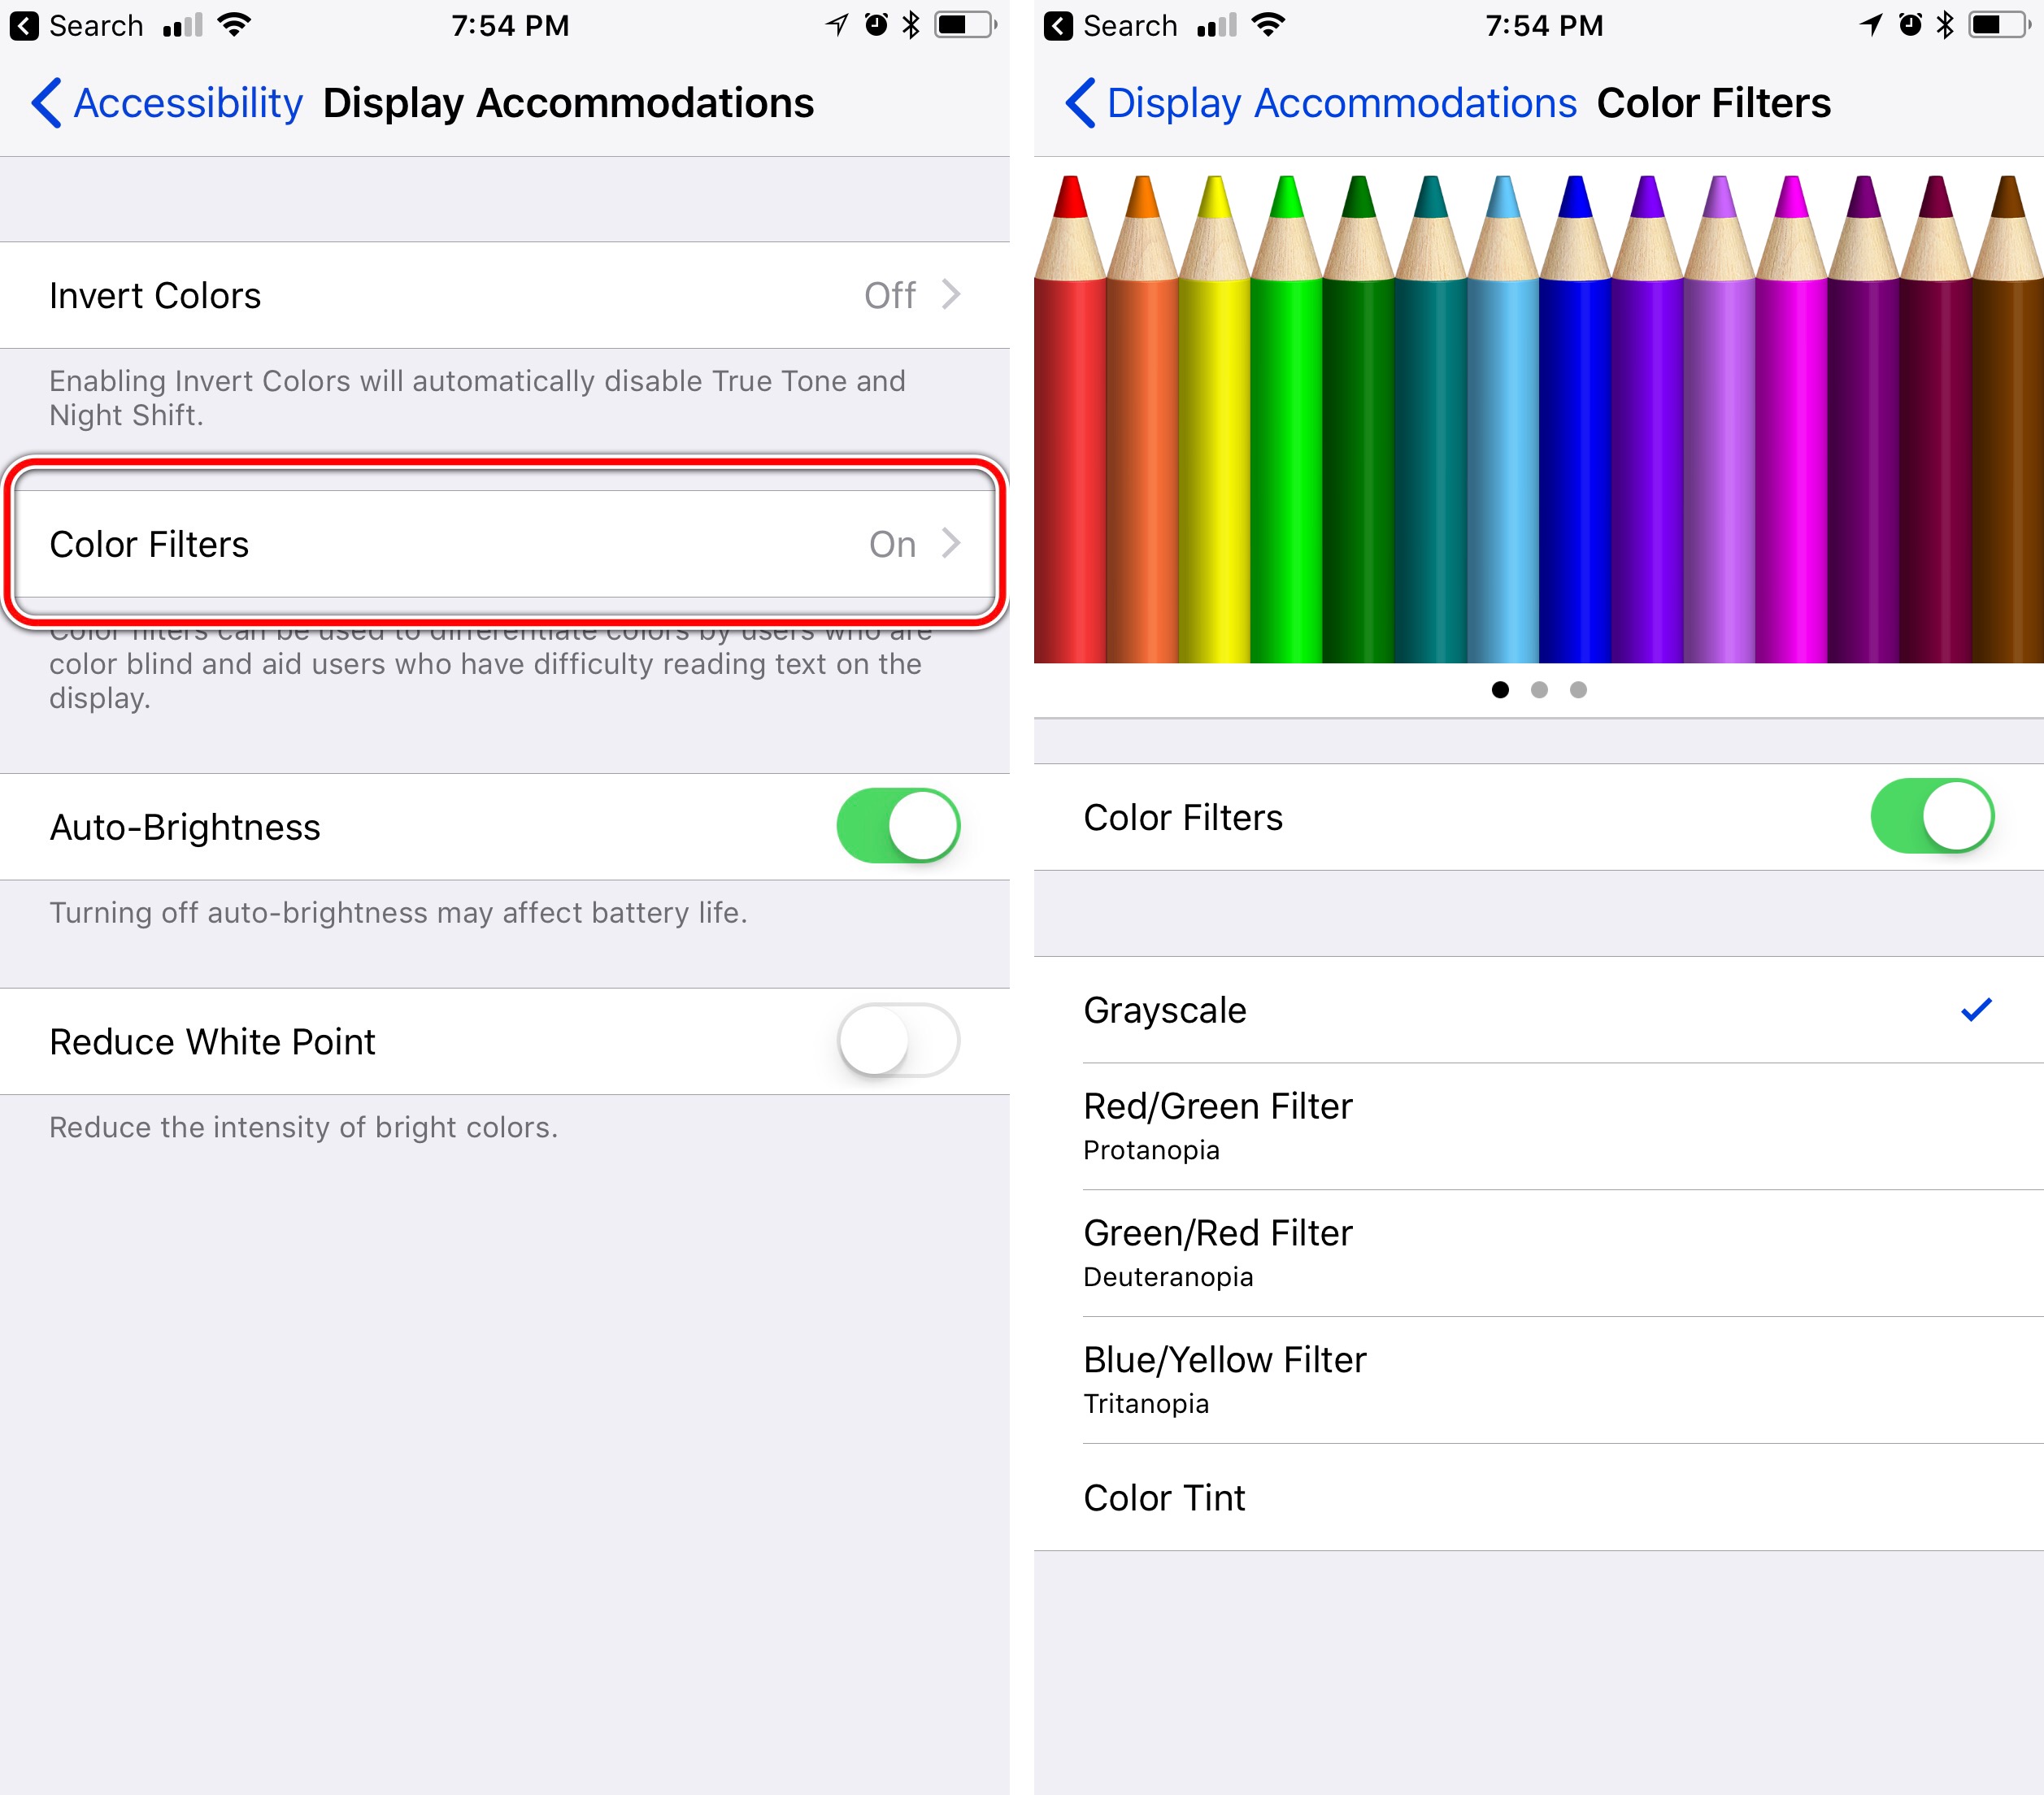 How to Invert the Colors on Your Apple or Android Device for